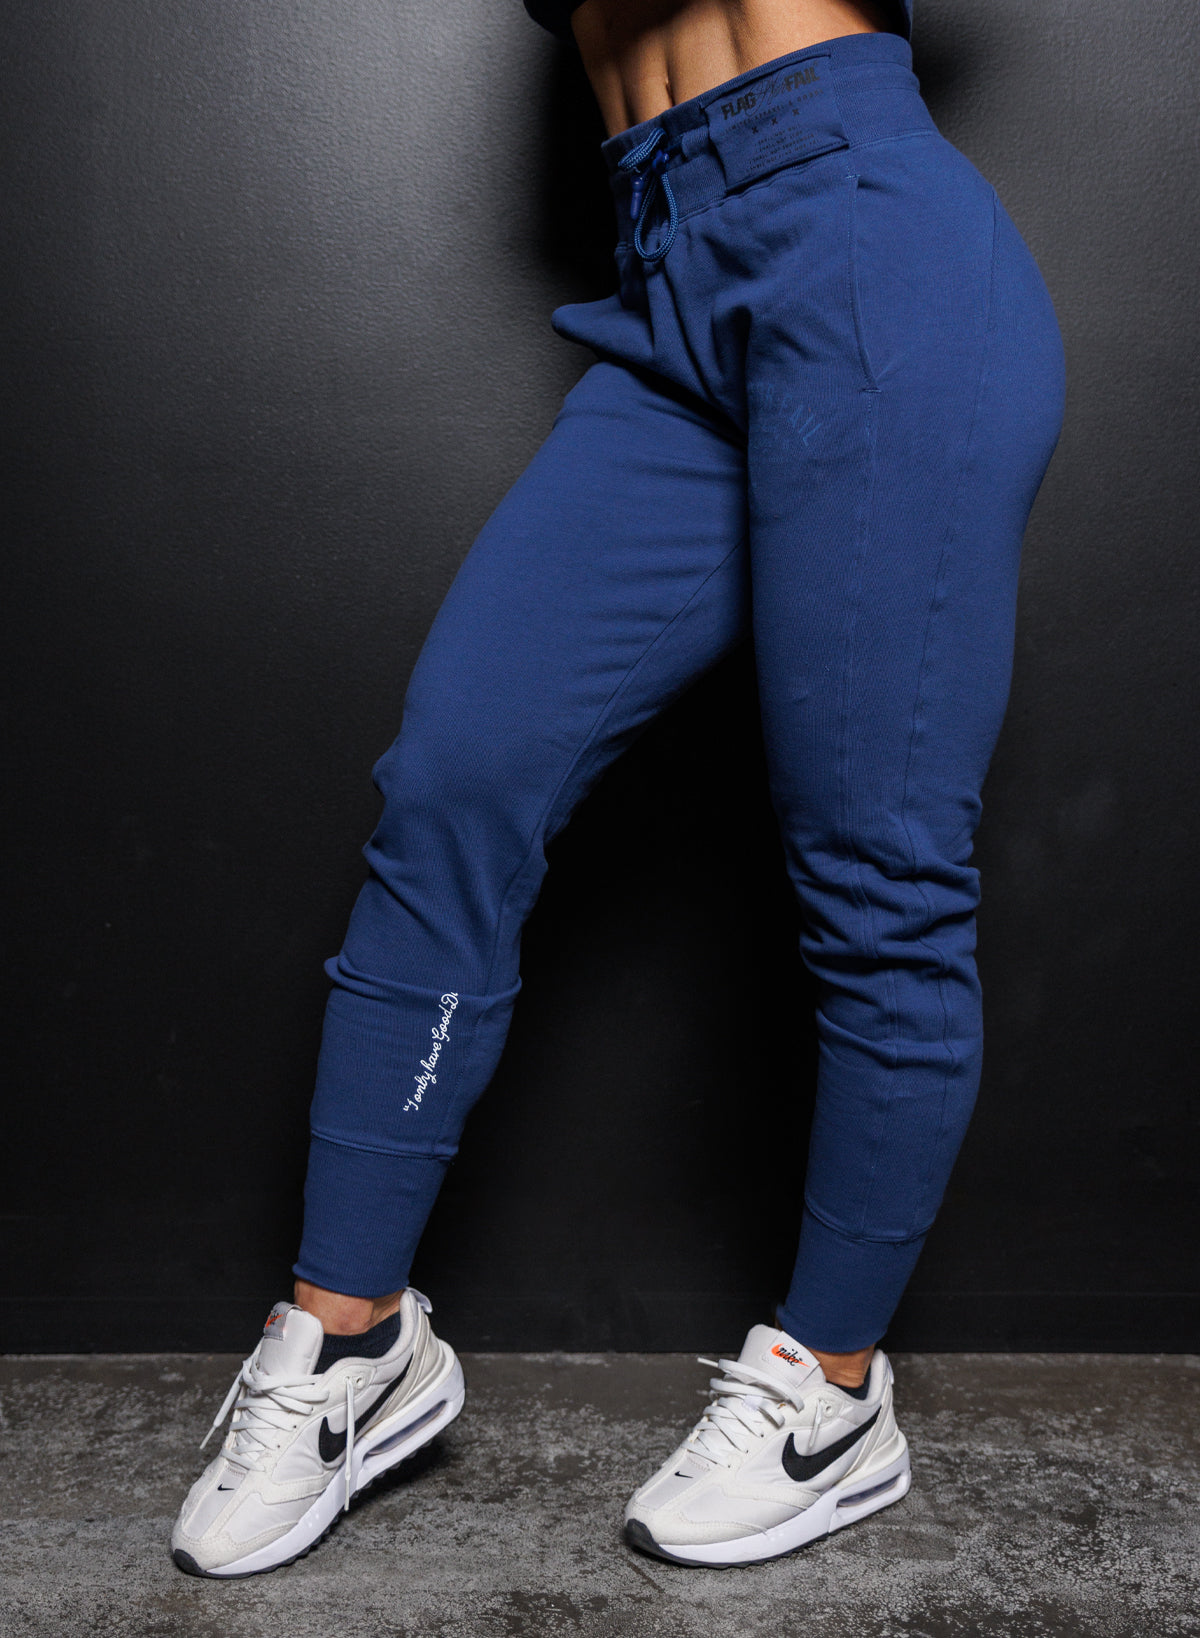 Orli - Colour Block - High waisted sport track pants with text tape - Molo